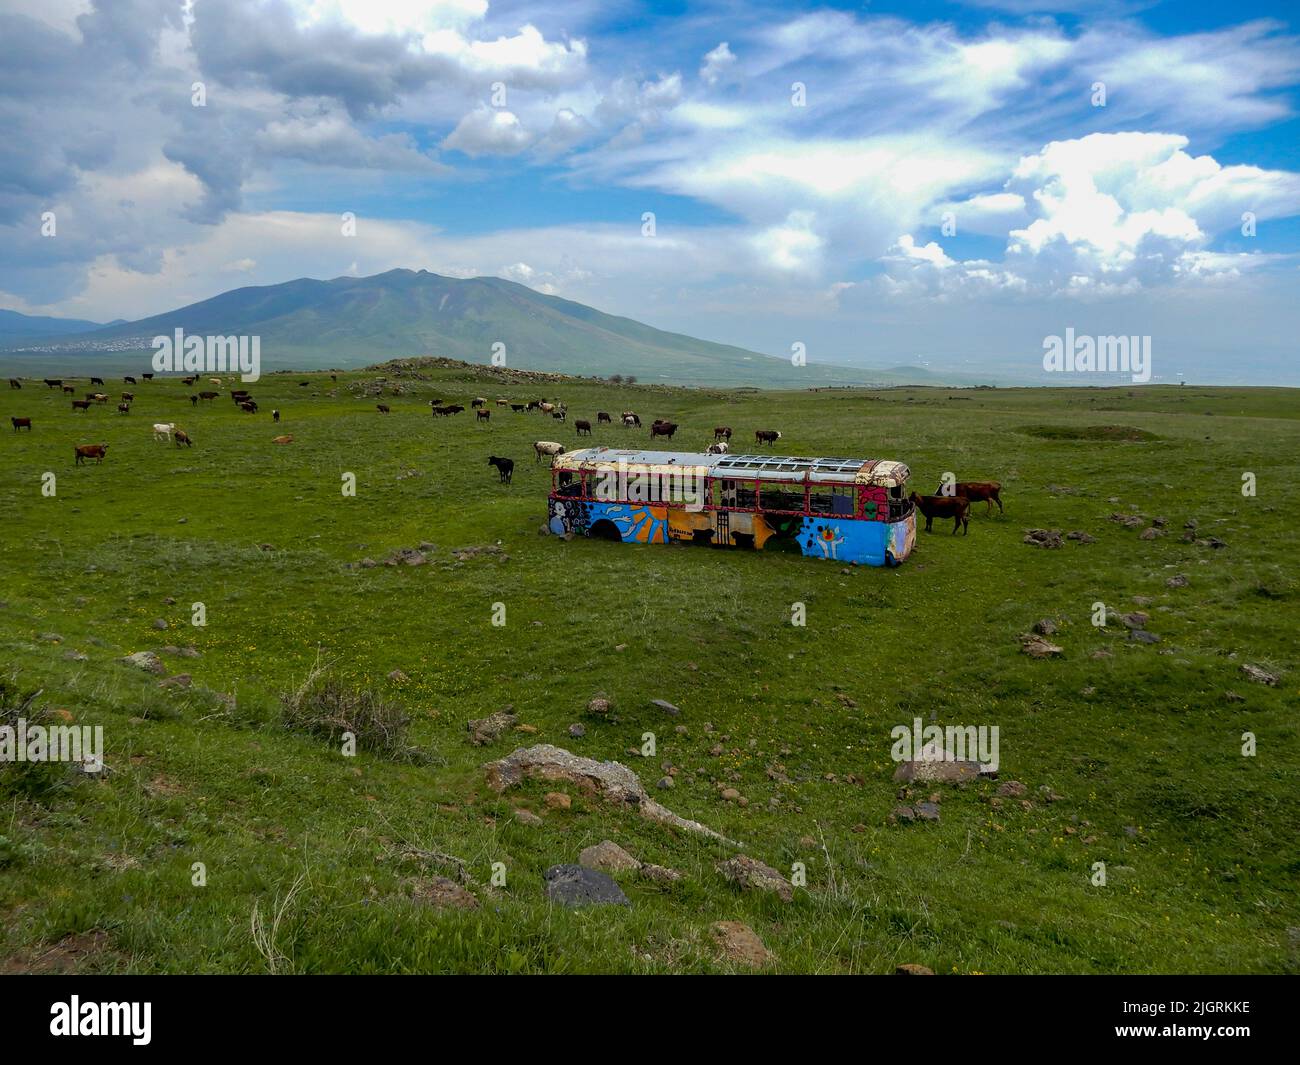 An abandoned bus with graffiti paintings in the field with cows and mountains in the background in Armenia Stock Photo